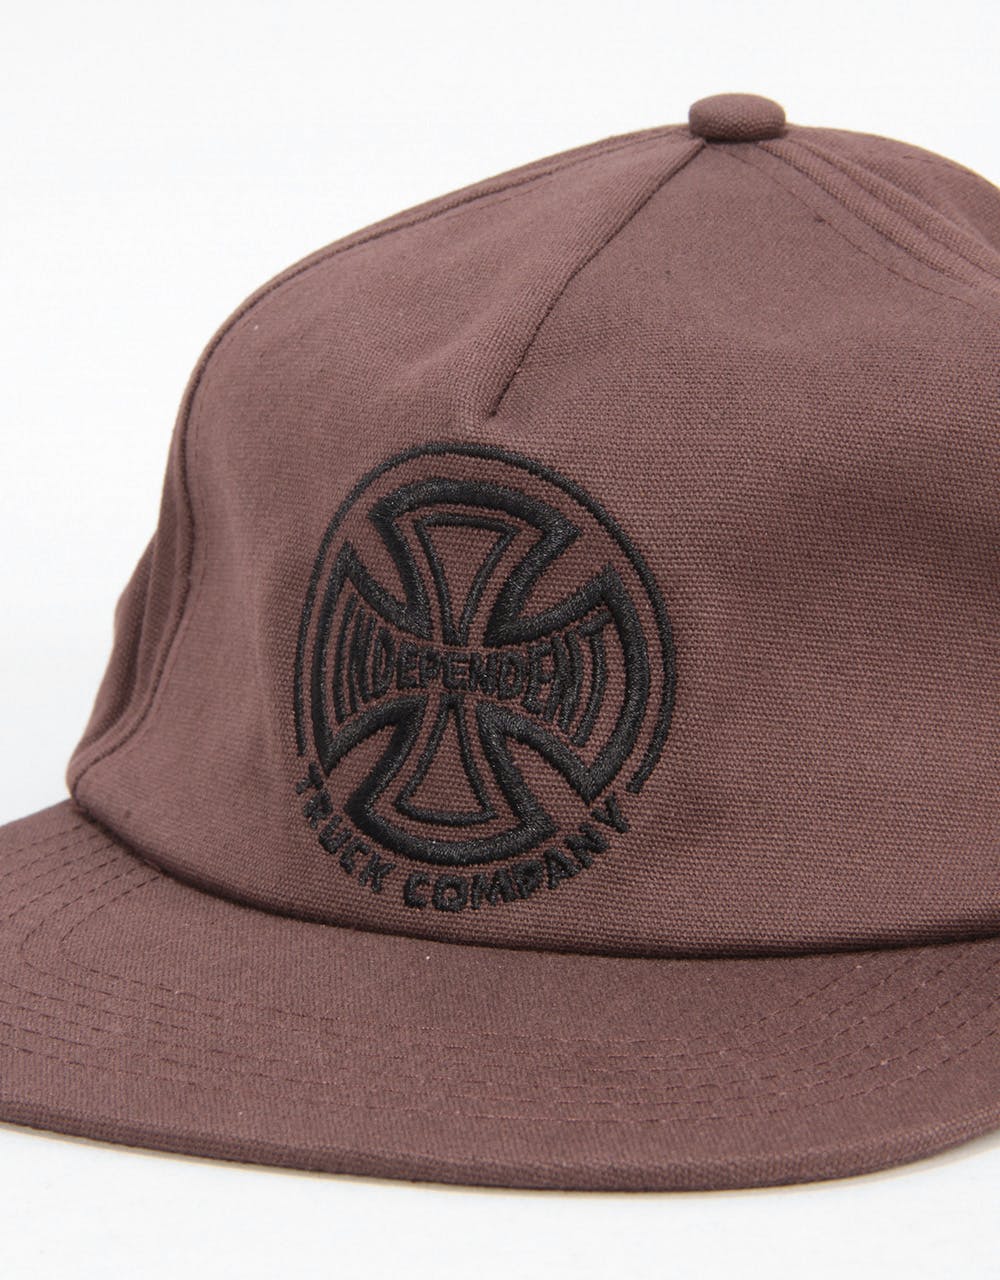 Independent Cap Truck Company Embroidery Cap - Chocolate